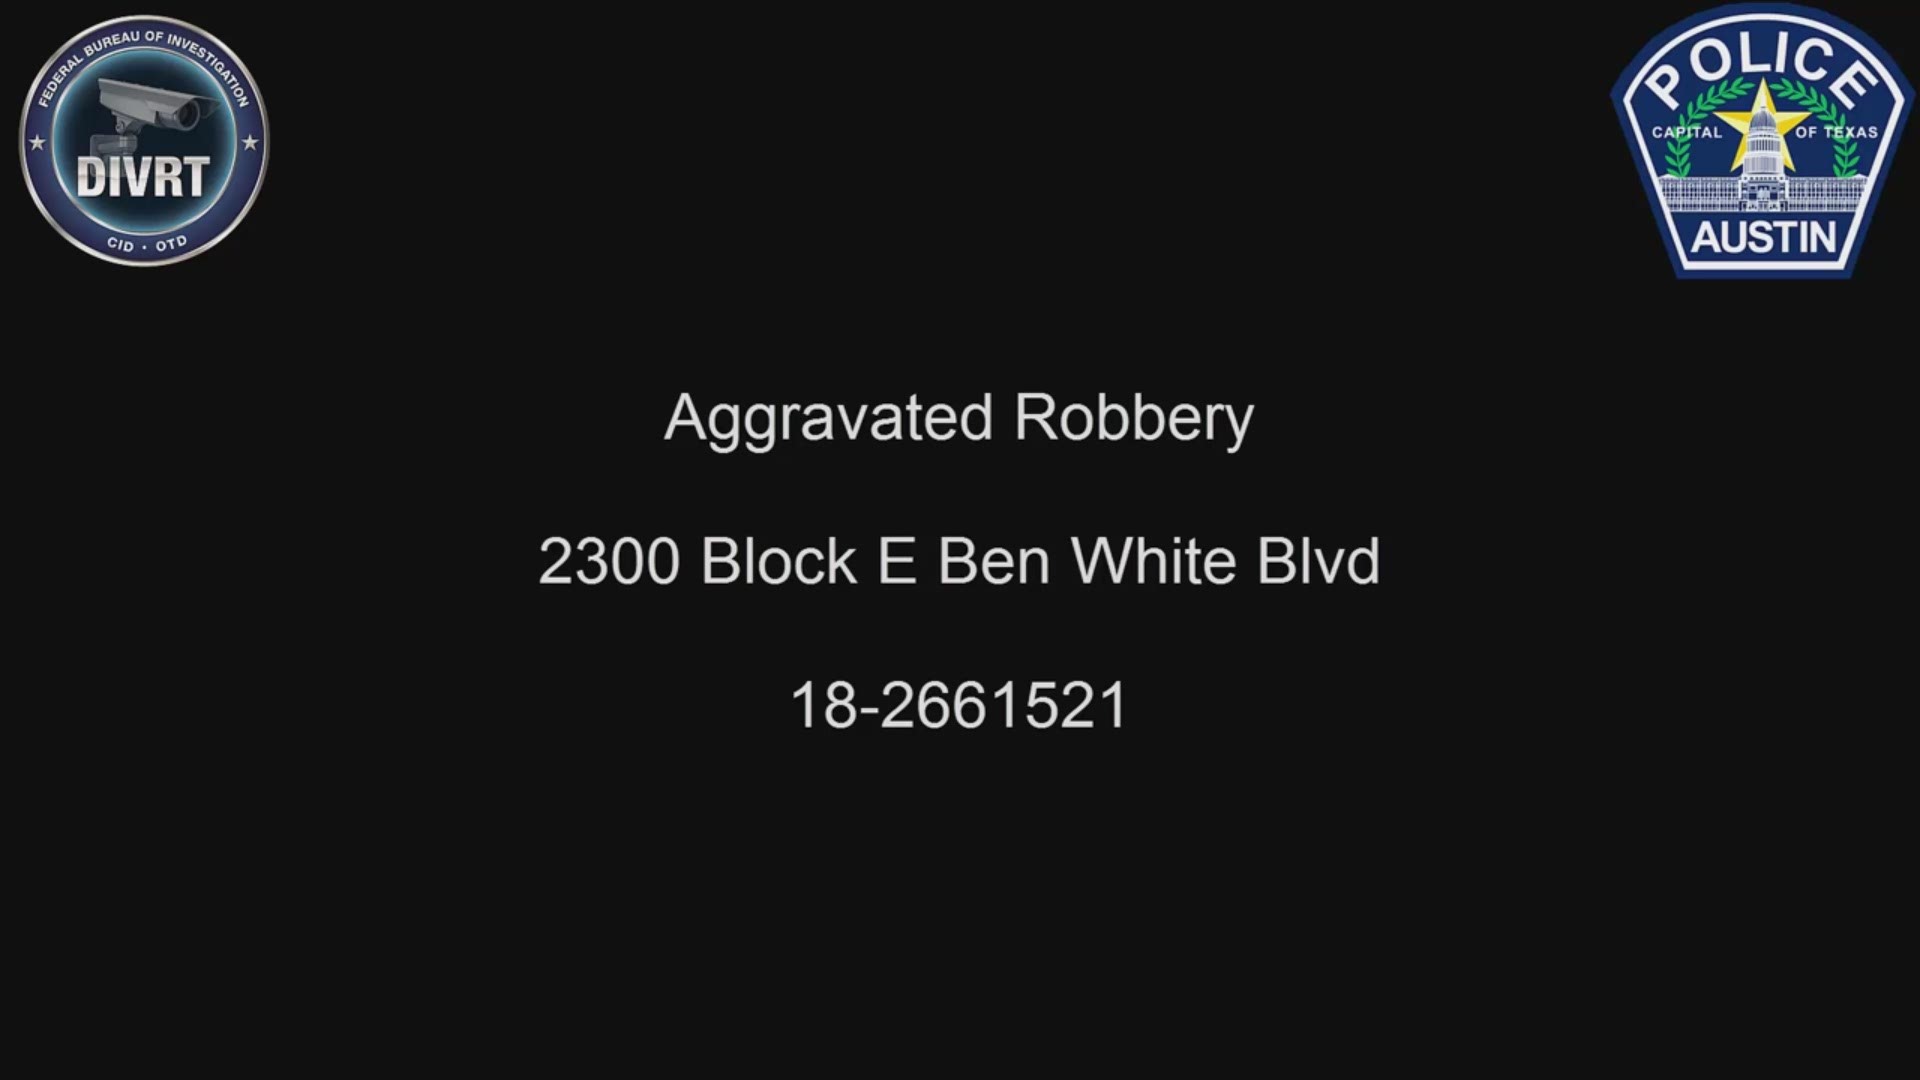 The Austin Police Department Robbery Unit is investigating an aggravated robbery that occurred on Sunday, September 23, 2018, around 8:40 p.m. at a convenience store in the 2300 block of E. Ben White Blvd.